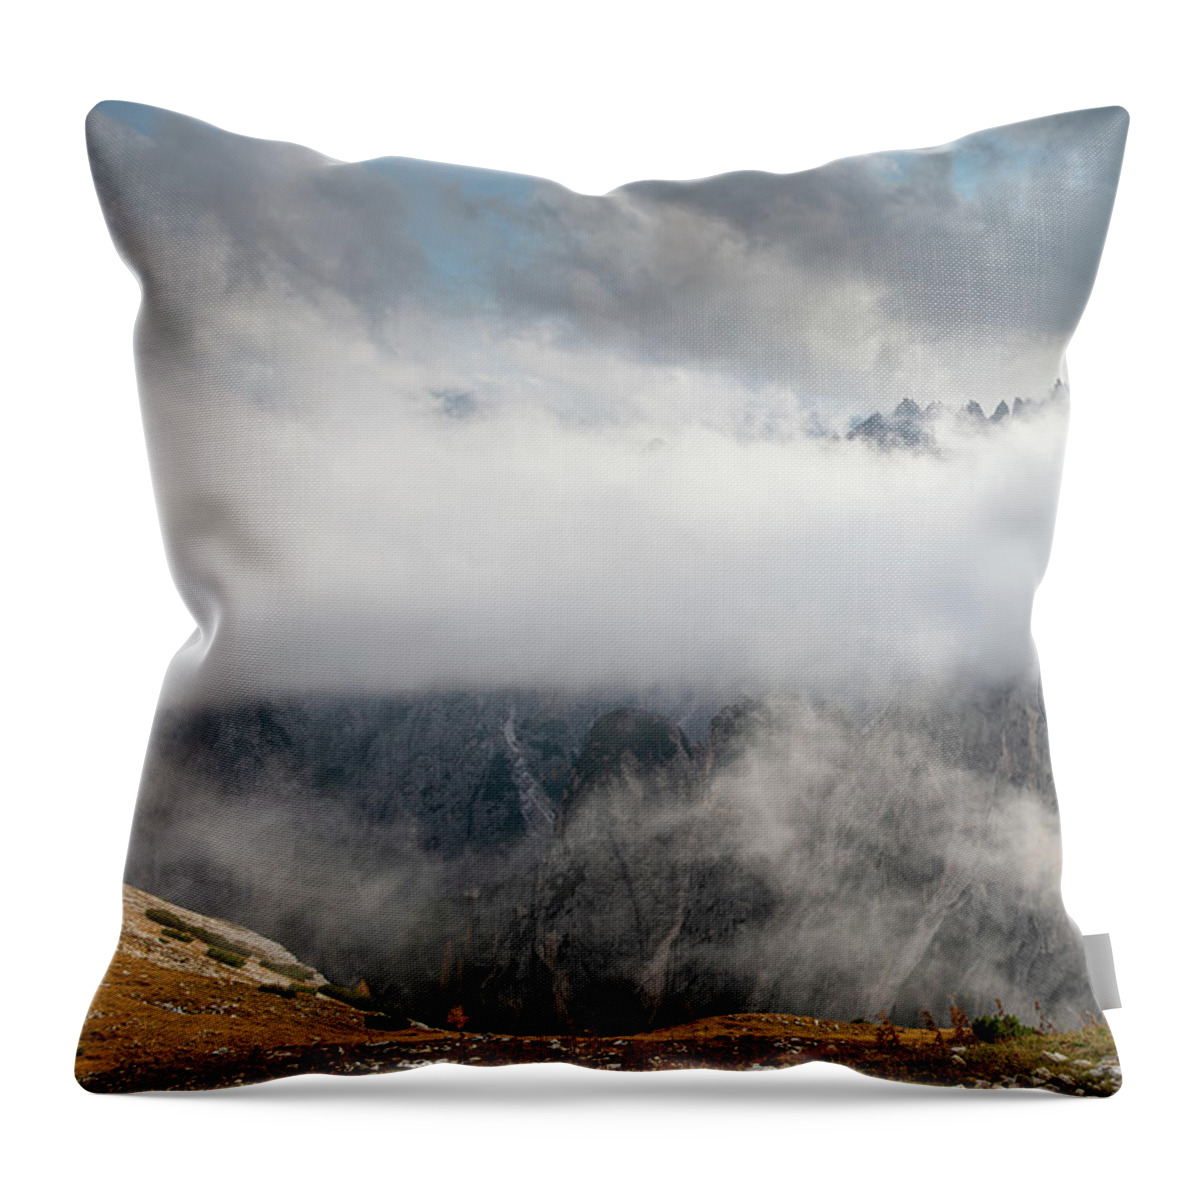 Amazed Throw Pillow featuring the photograph Mountain Landscape, Italian Dolomites Italy by Michalakis Ppalis